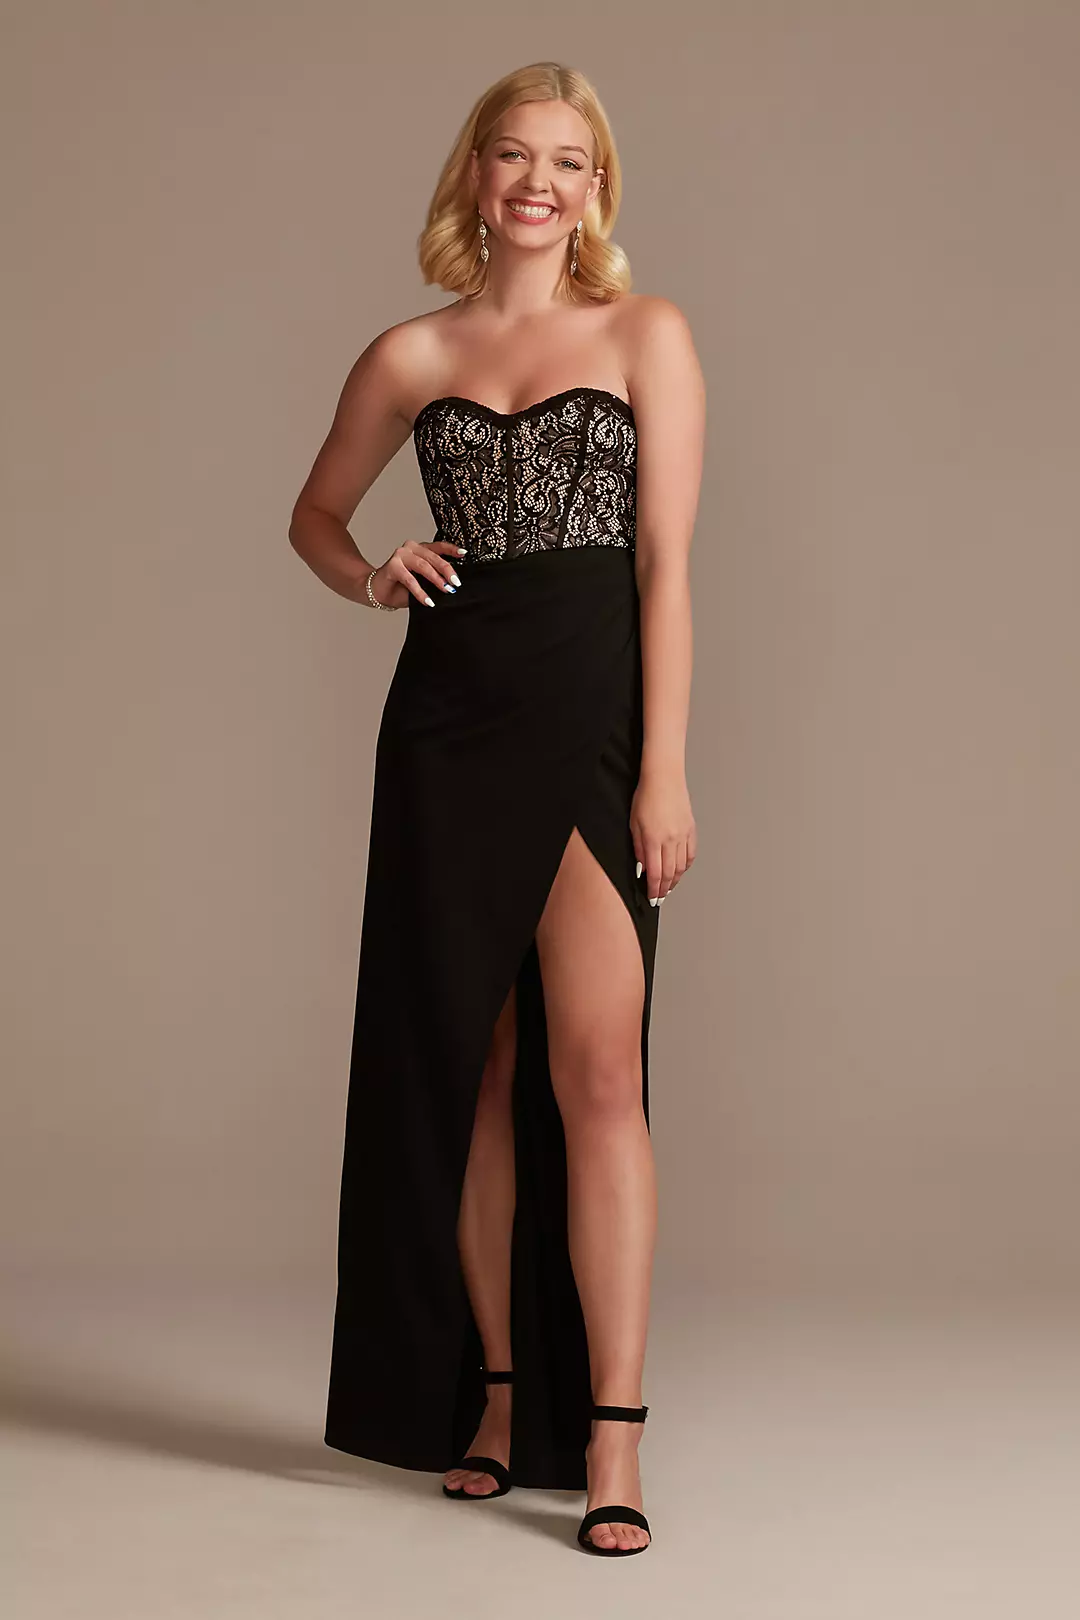 Lace Bodice Strapless Gown with Asymmetrical Waist Image